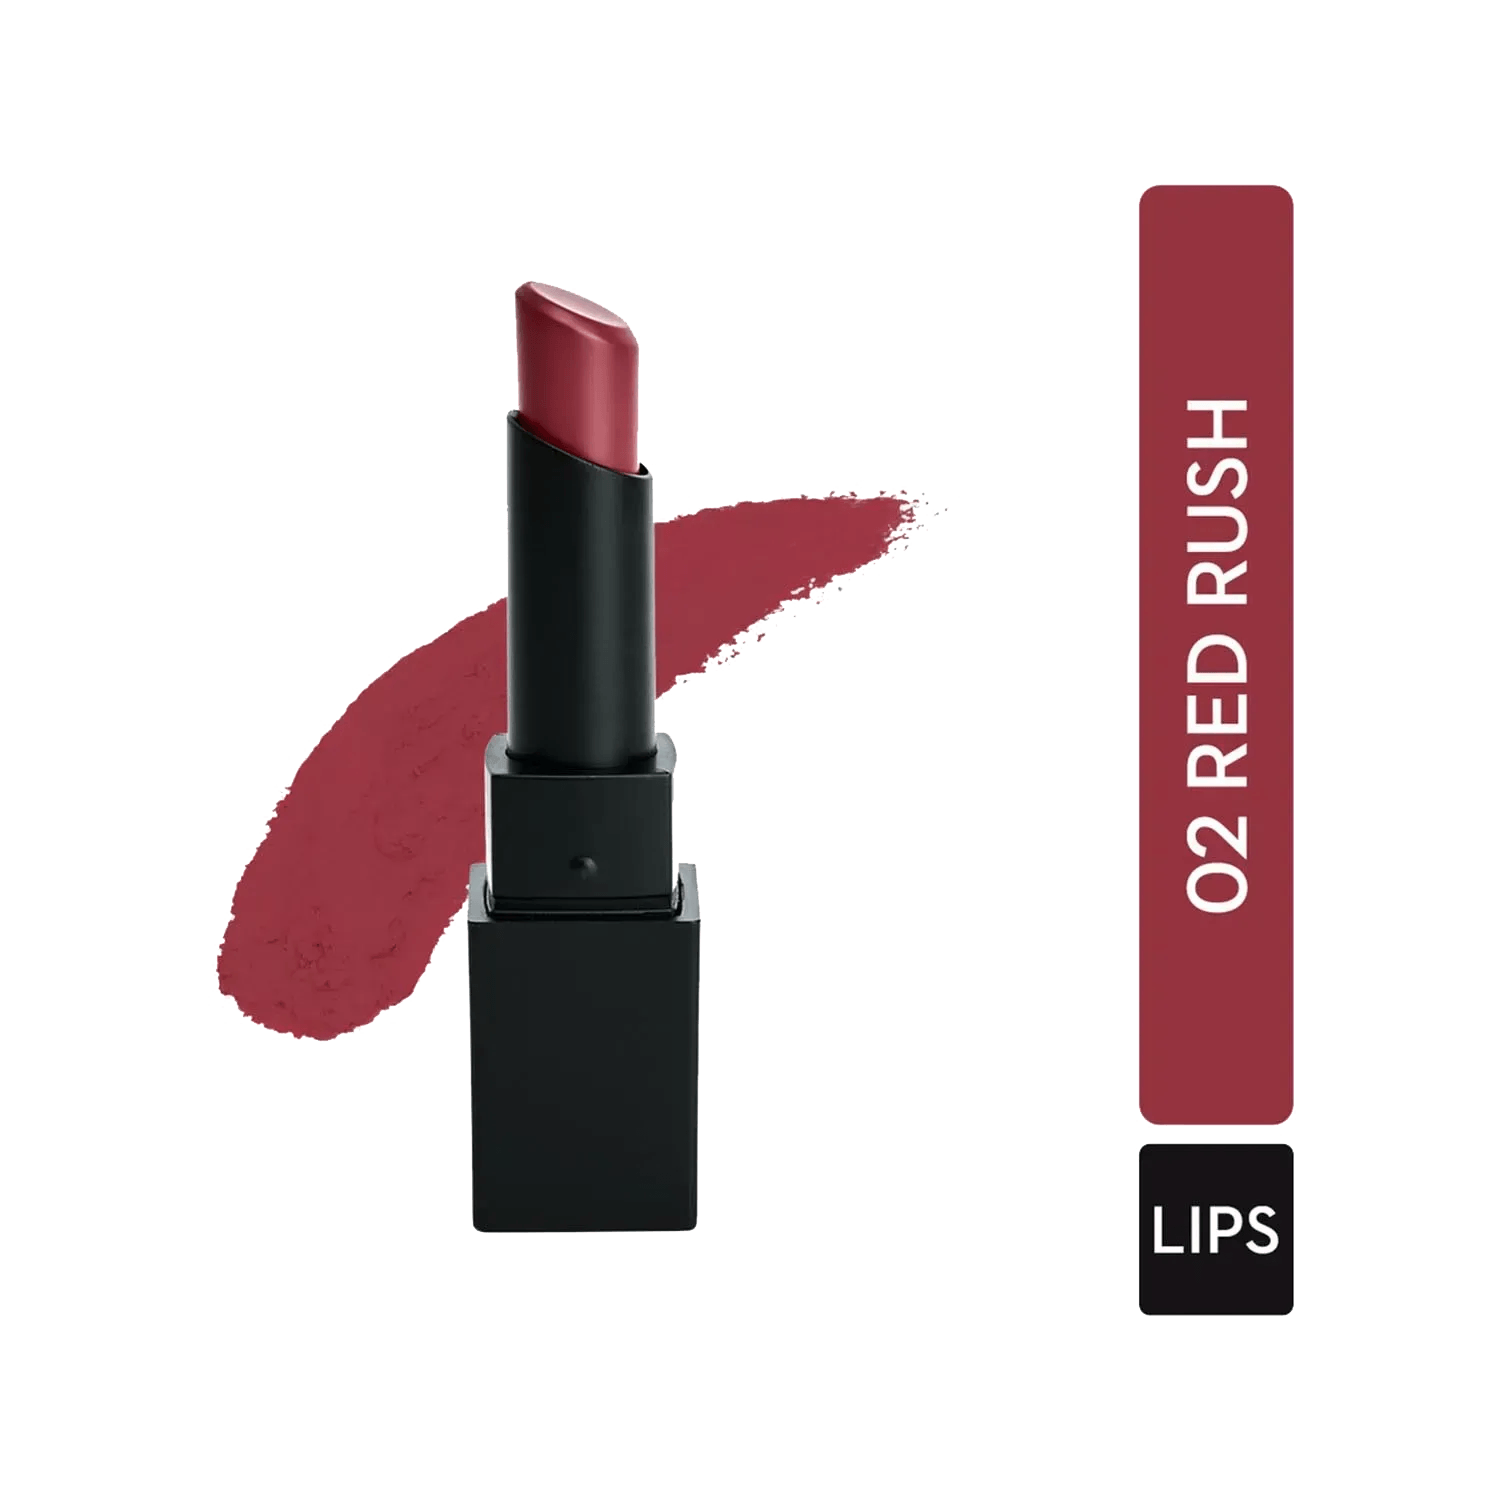 SUGAR Cosmetics Nothing Else Matter Longwear Lipstick - 02 Red Rush (Red with Hints of Pink, Orange) (3.5g)